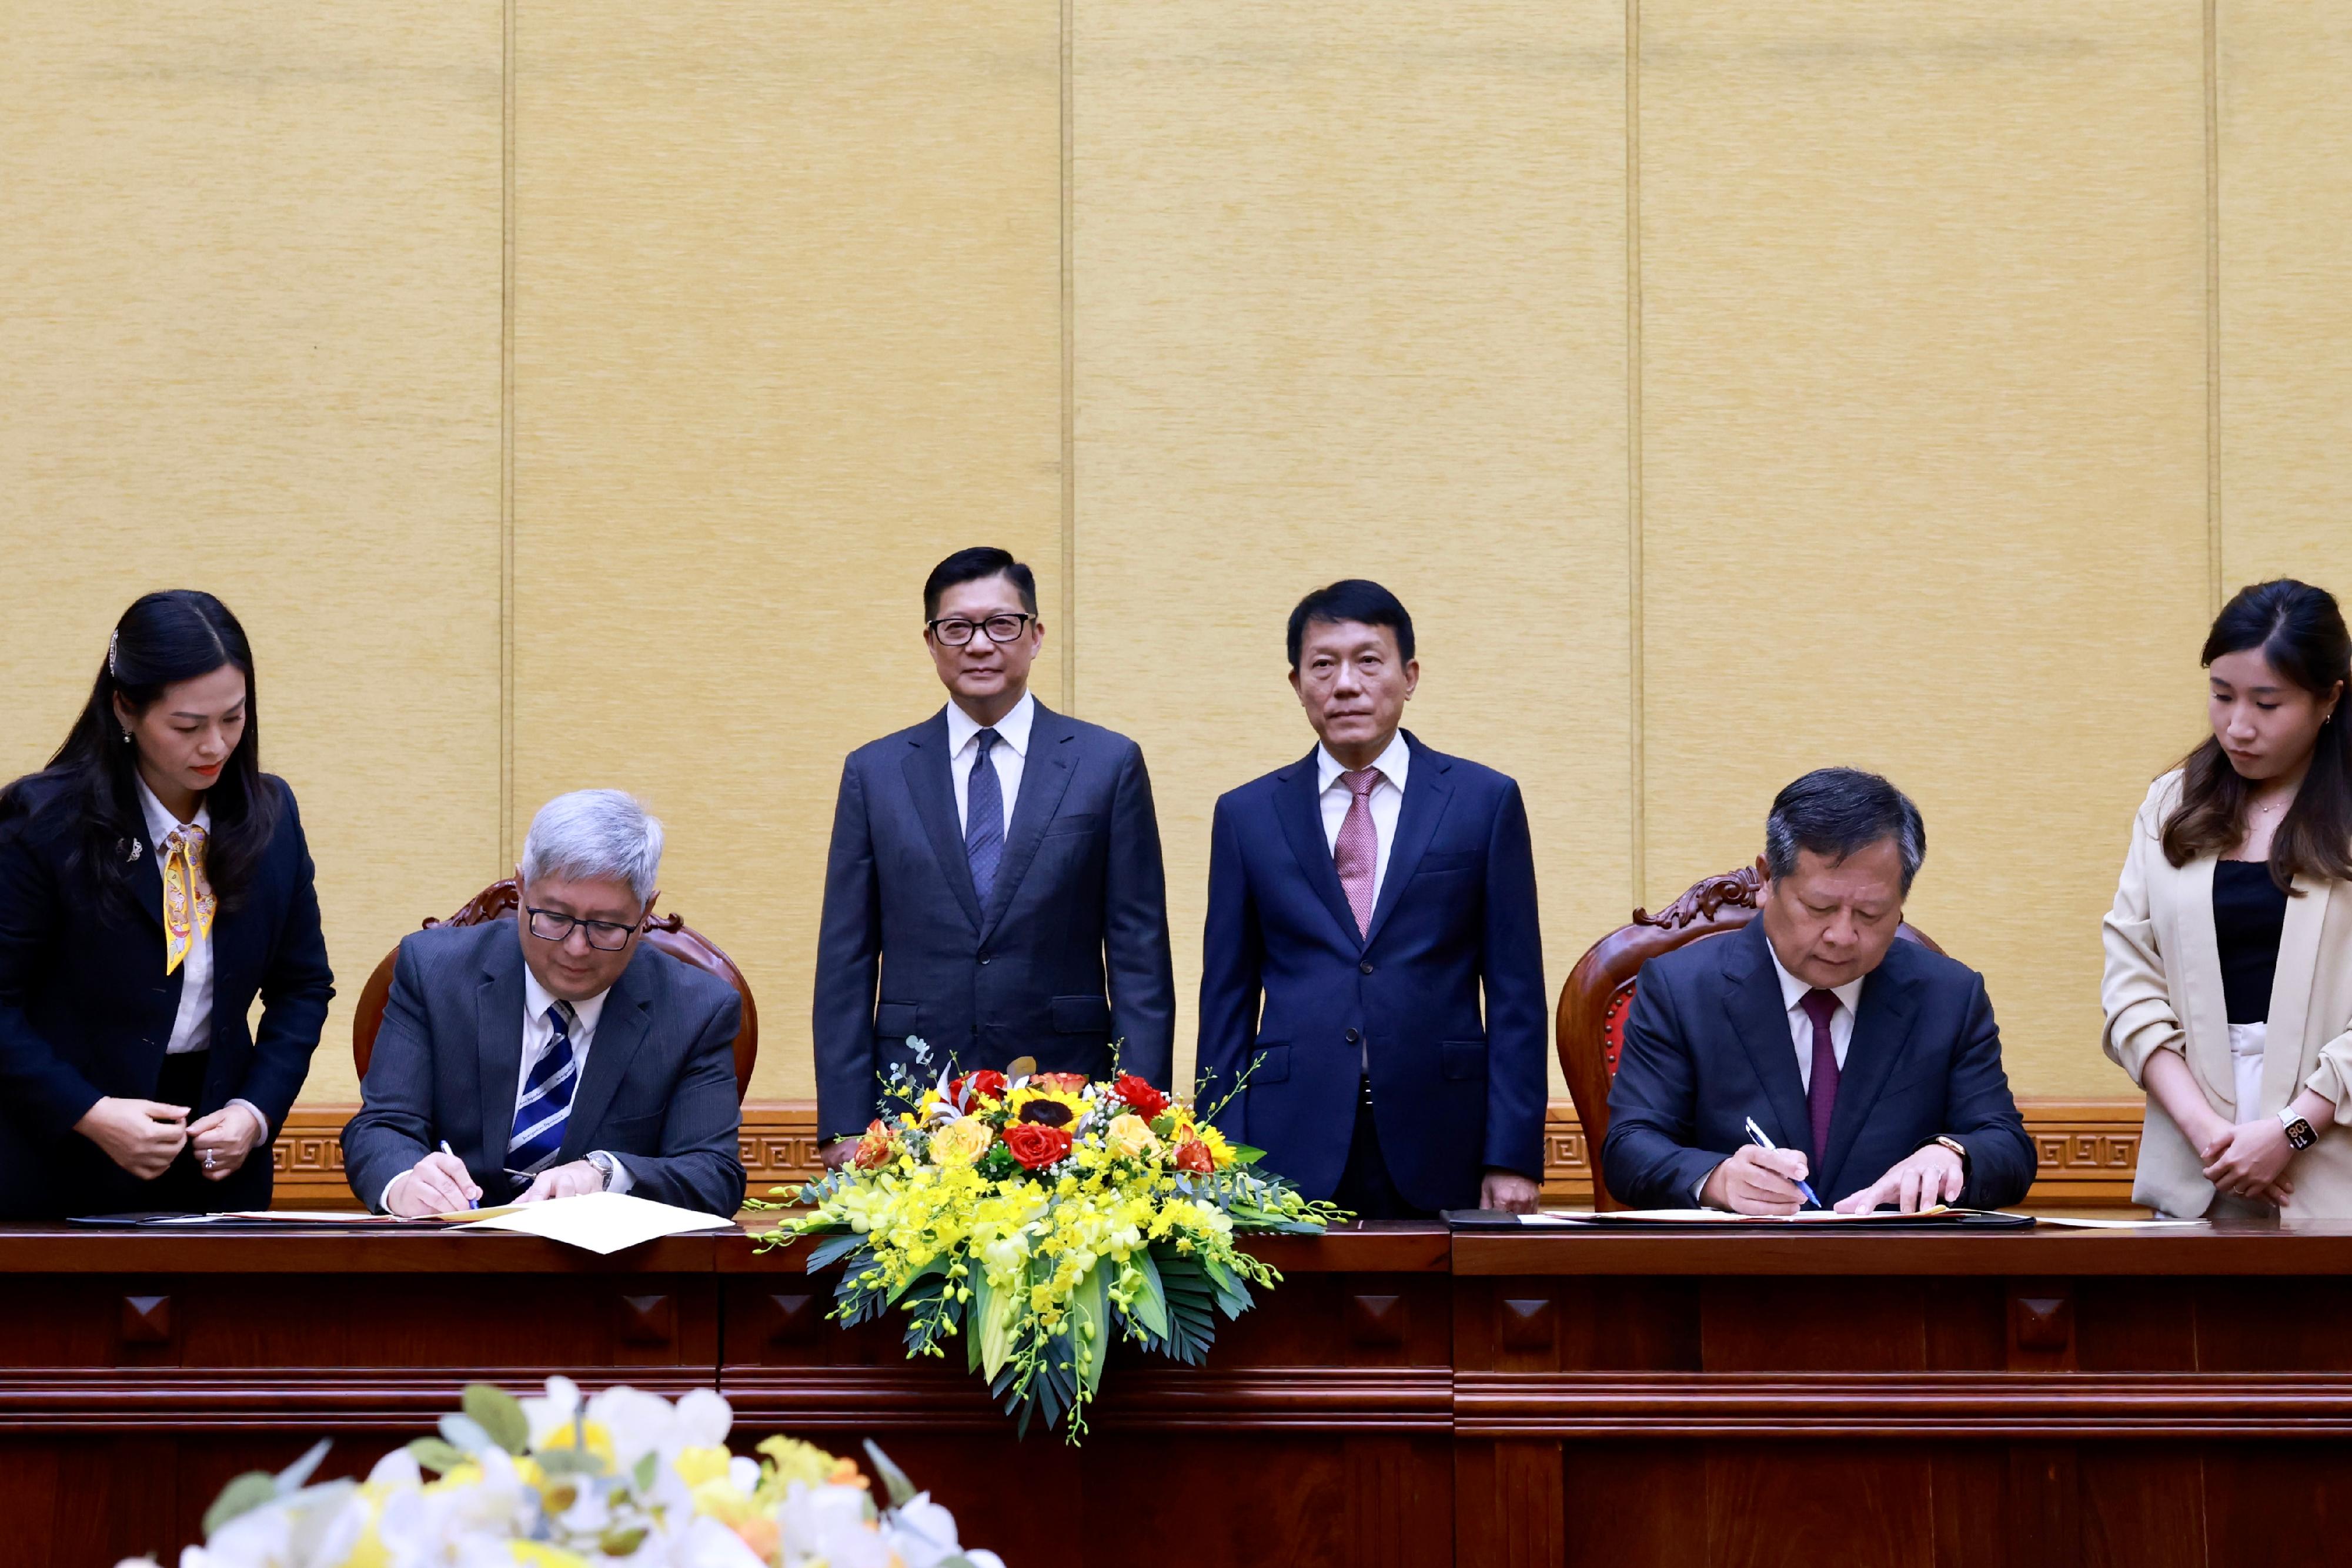 The Secretary for Security, Mr Tang Ping-keung, began his visit programme in Vietnam today (August 28). Photo shows Mr Tang (back row, first left) and the Deputy Minister of Public Security of Vietnam, Senior Lieutenant General Luong Tam Quang (back row, first right), witnessing the signing of the Memorandum of Understanding by the Director of Immigration, Mr Au Ka-wang (front row, second left), and the Director General of Immigration Department of Vietnam, Mr Pham Dang Khoa (front row, second right), on enhancing co-operation in respect of immigration matters of the two places.